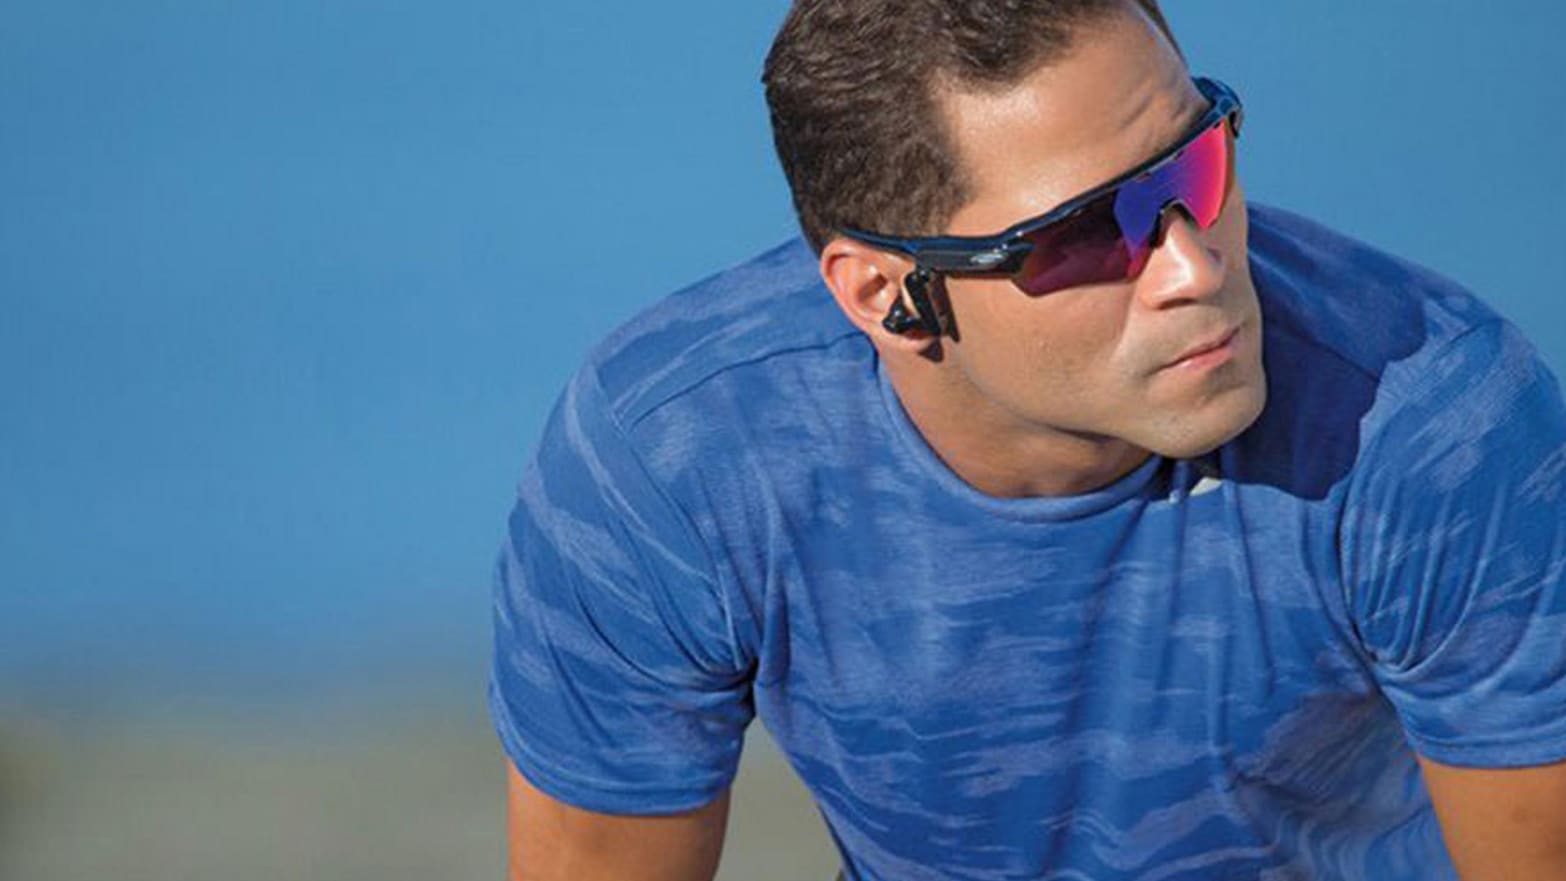 Oakley's Smart Sunglasses Track Your Performance and Help You